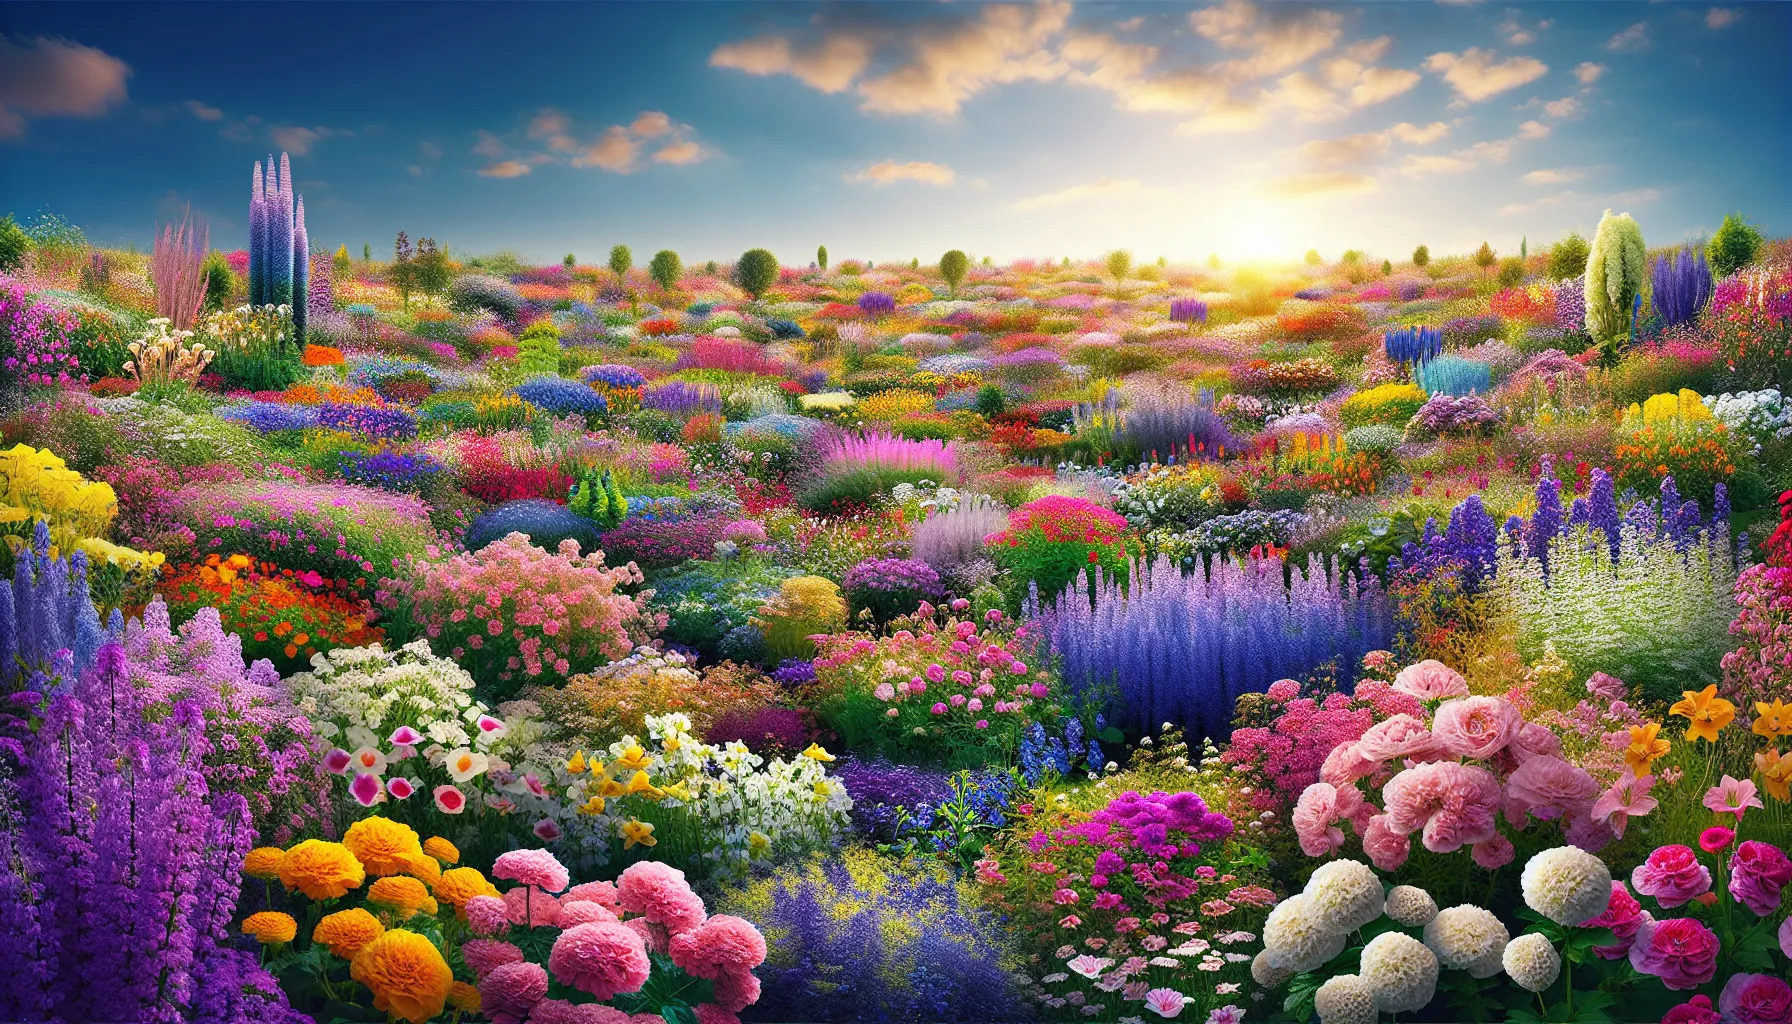 A vibrant panorama of yard flowers in full bloom under a sunset sky.